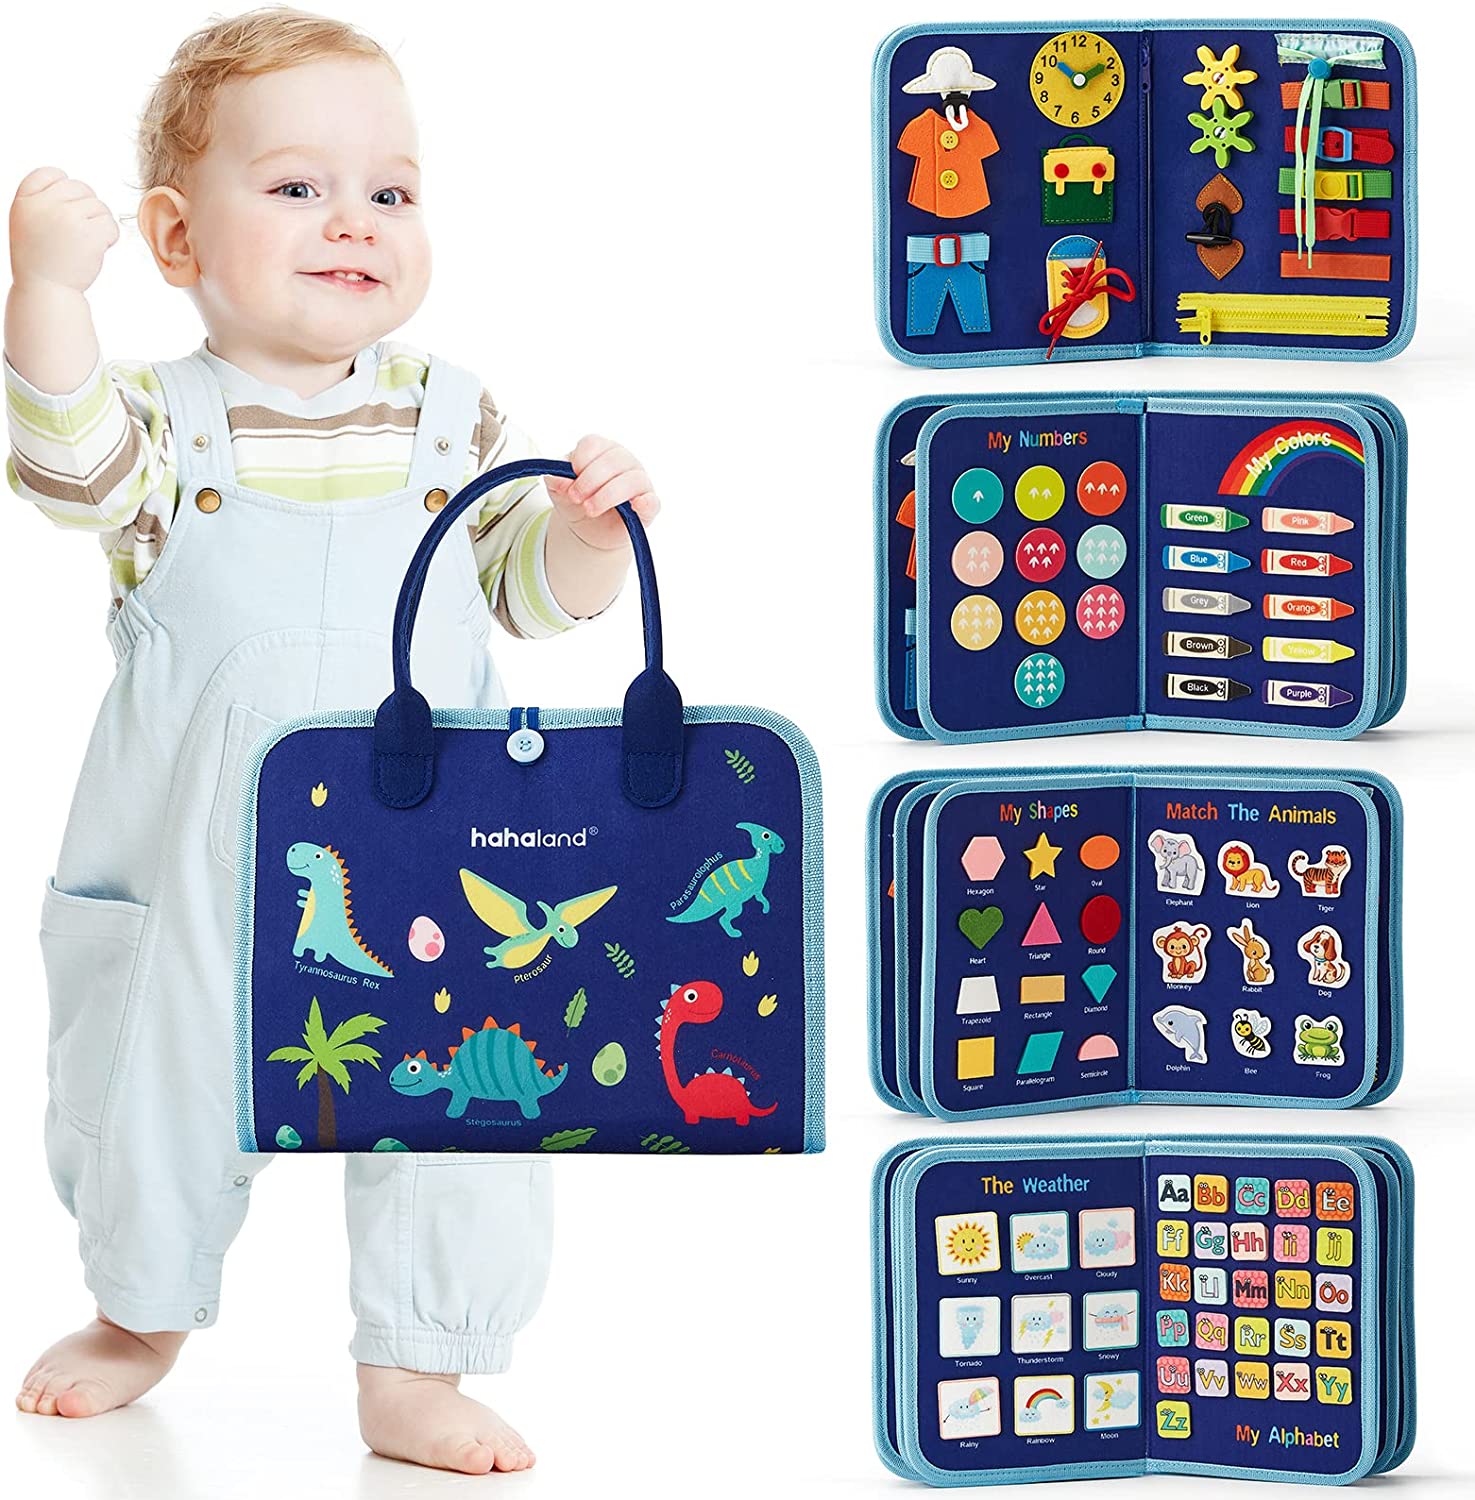 Toddler Dinosaur Backpack Preschool Busy Board With Buckles and